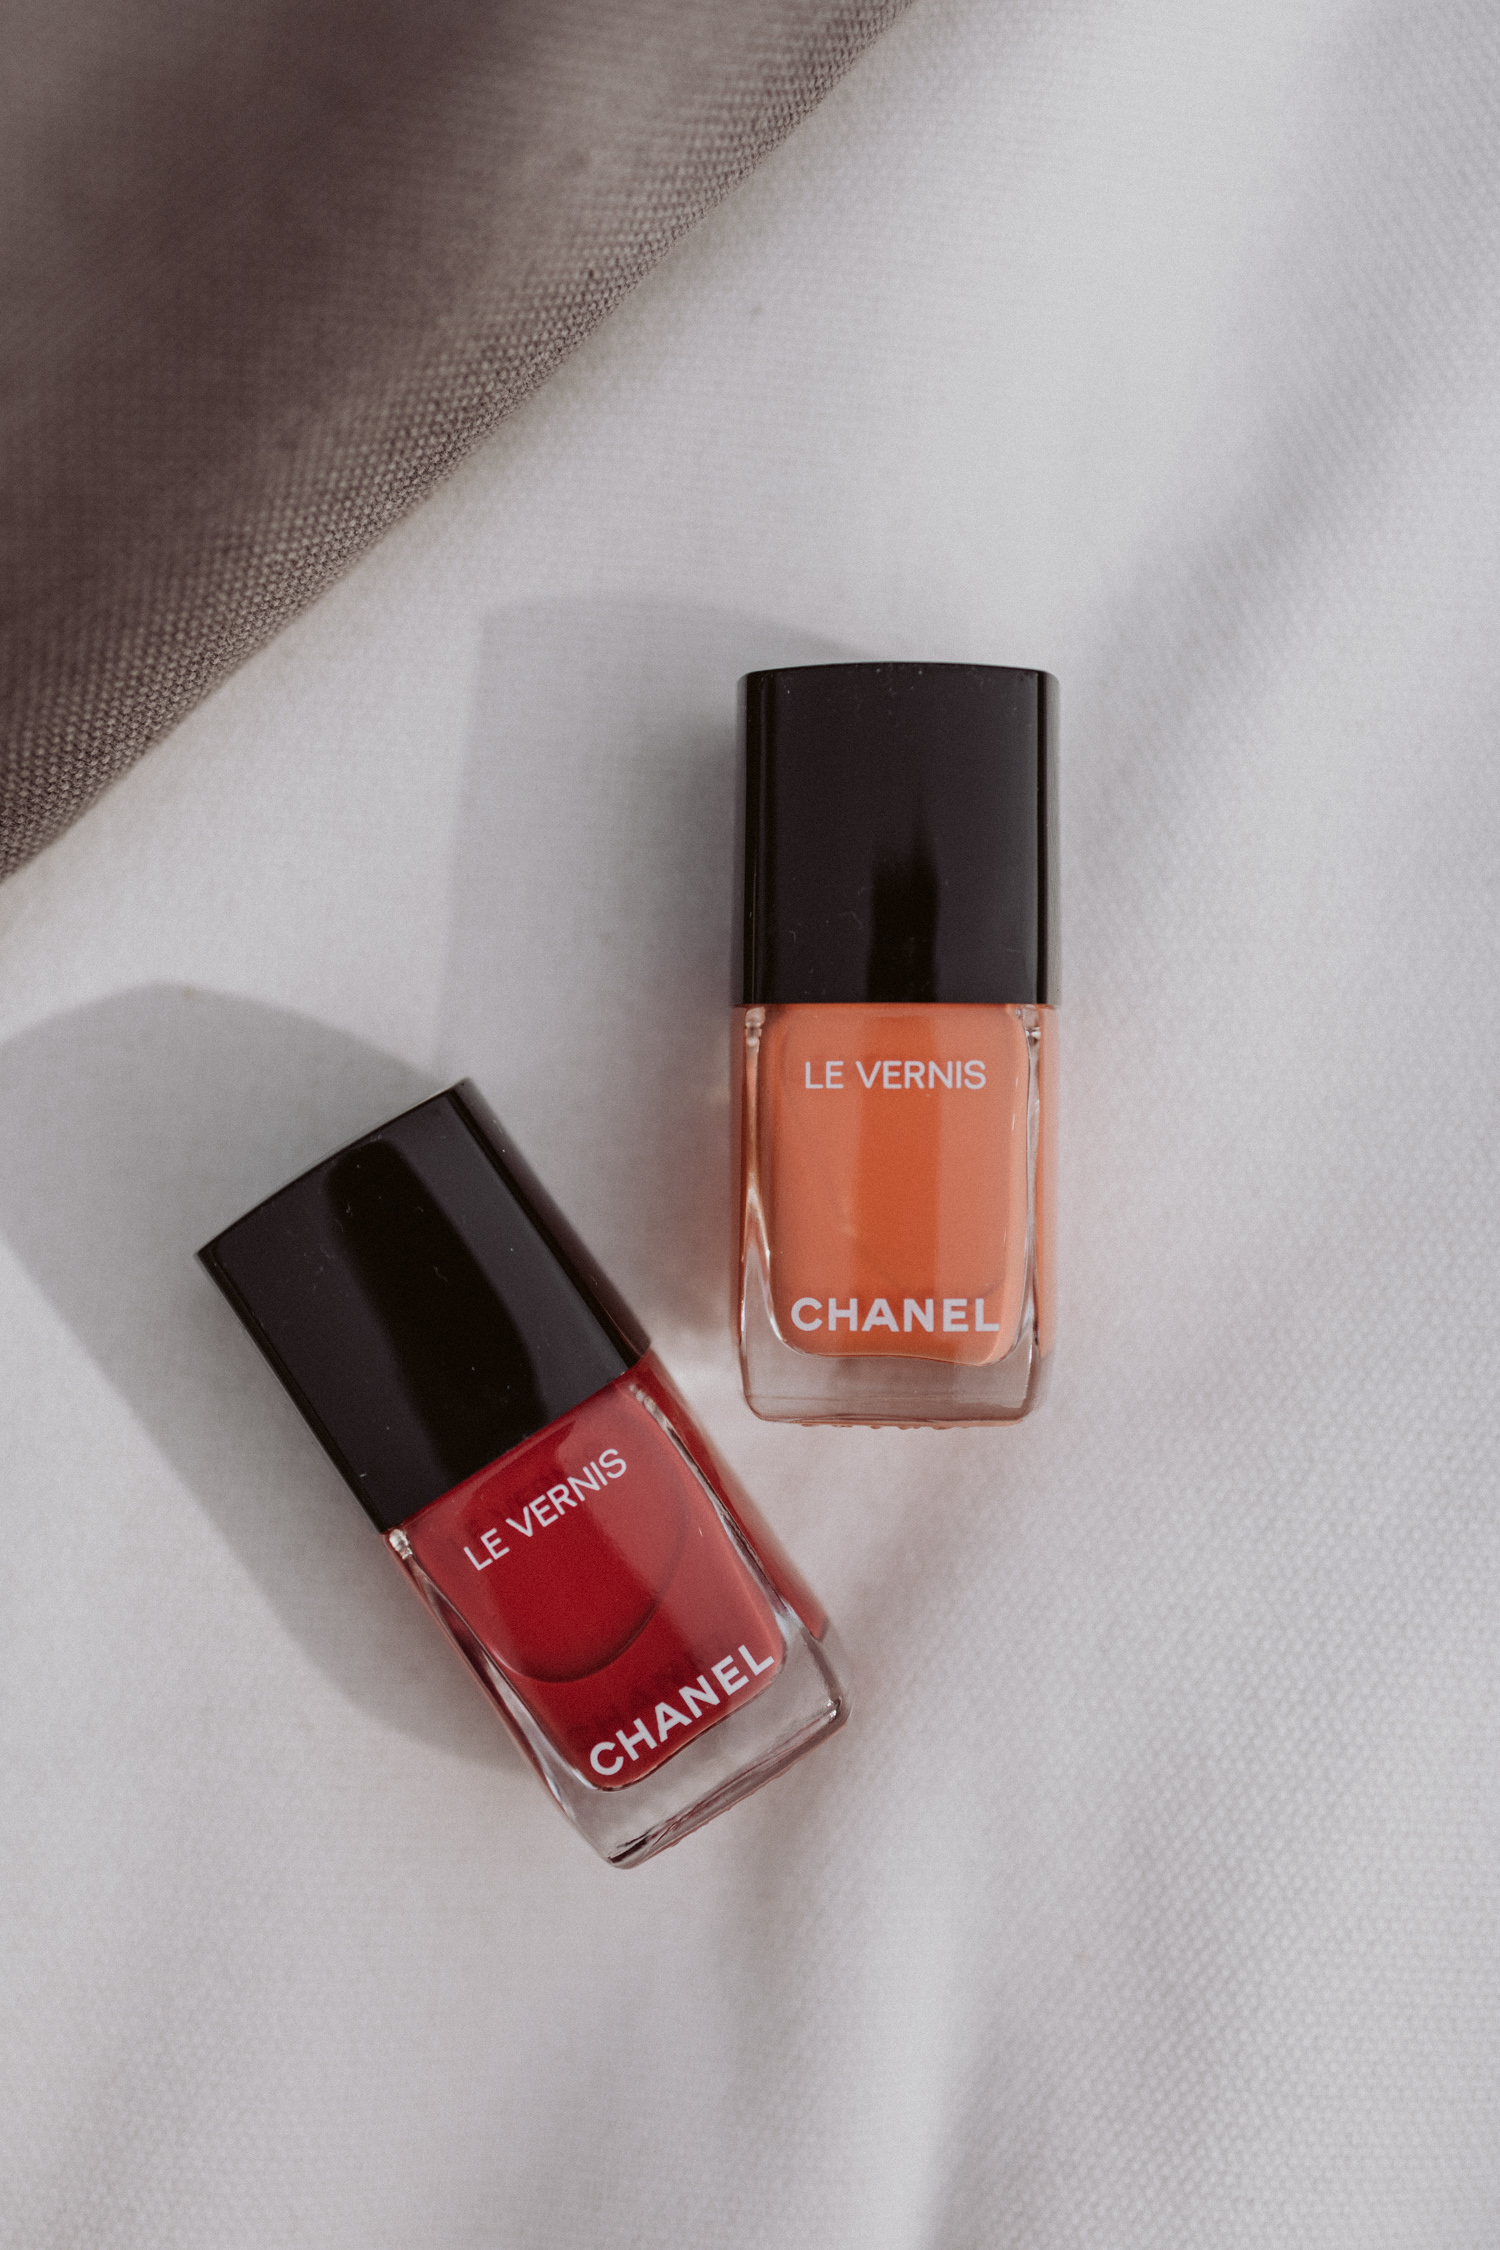 Chanel-Les-Beiges-Summer-Of-Glow - The Daily Dose